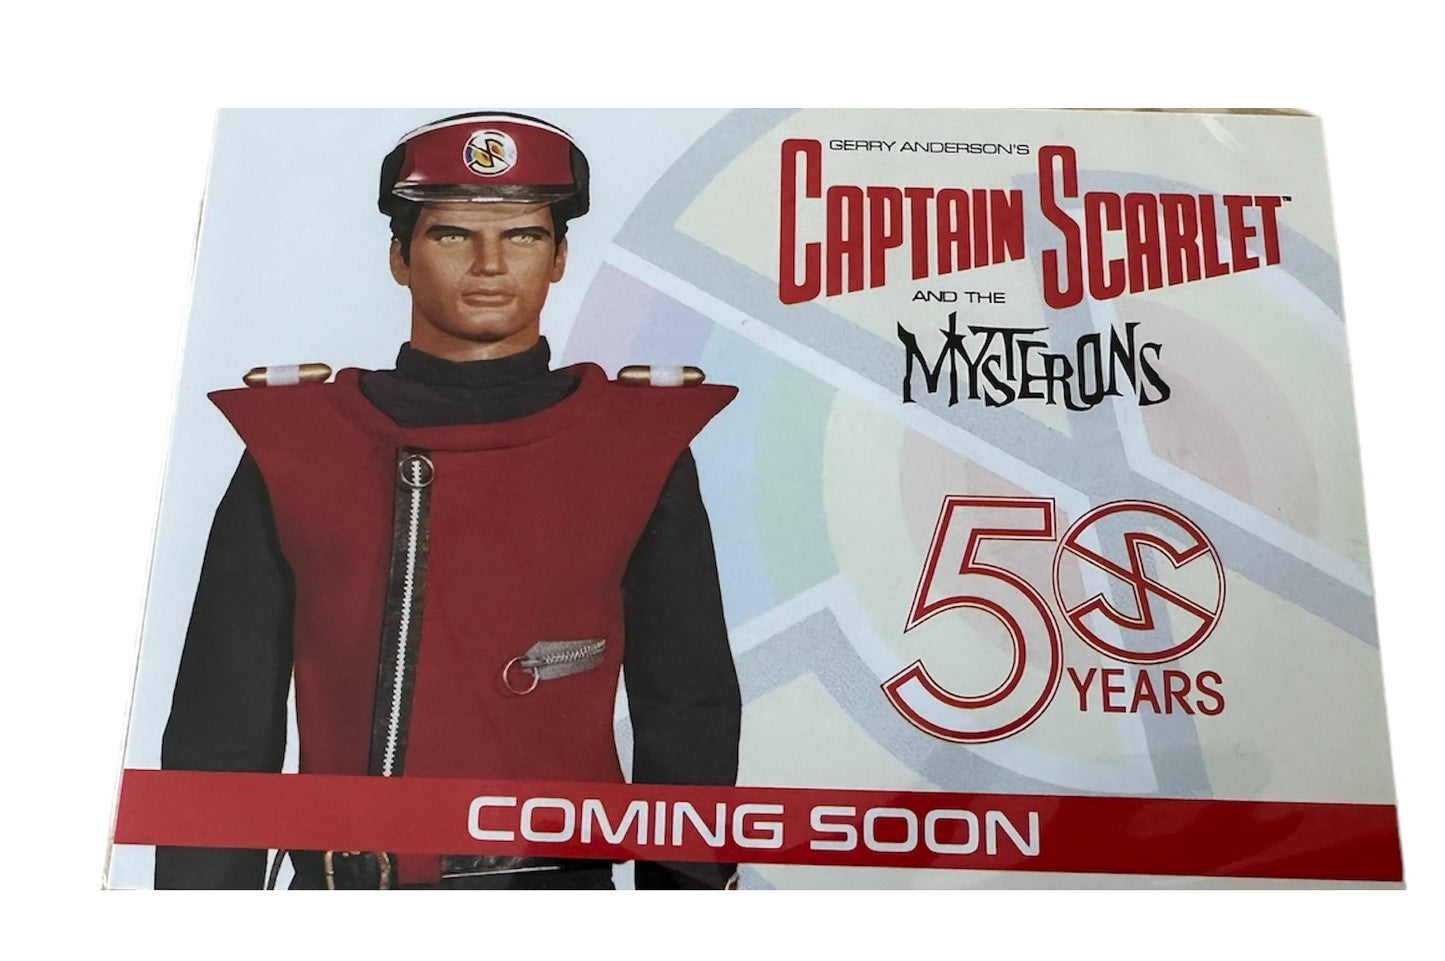 Vintage Unstoppable 2017  Gerry Andersons Captain Scarlet And The Mysterons 50th Anniversary Preview Card PR1 - Very Rare - Former Shop Stock